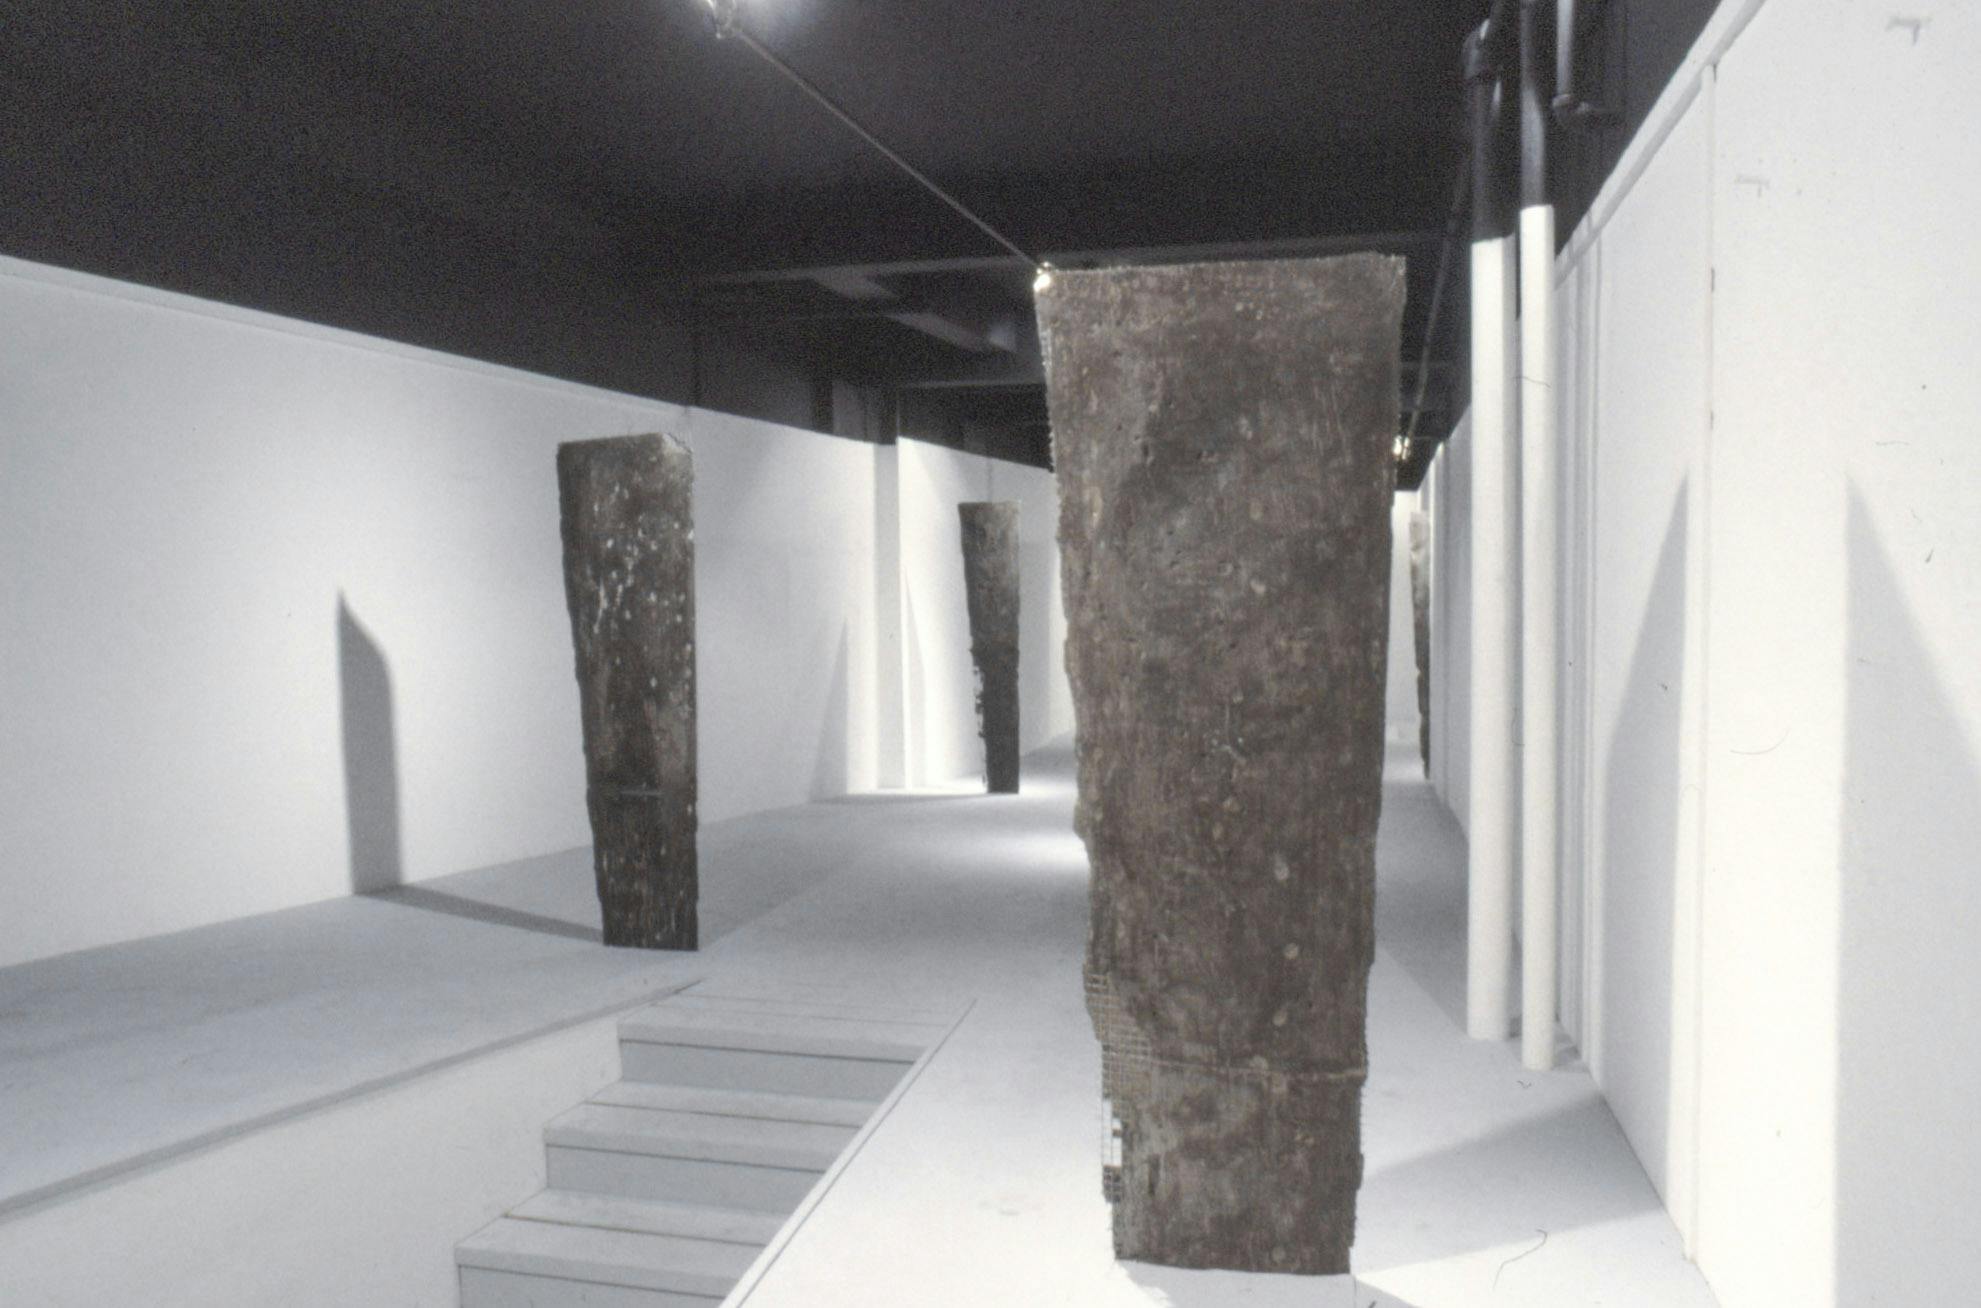 Several vertical structures made of cast metal-cement and wire stand on a white surface in a gallery, close to the ceiling. A set of steps leading to the works is partially visible.